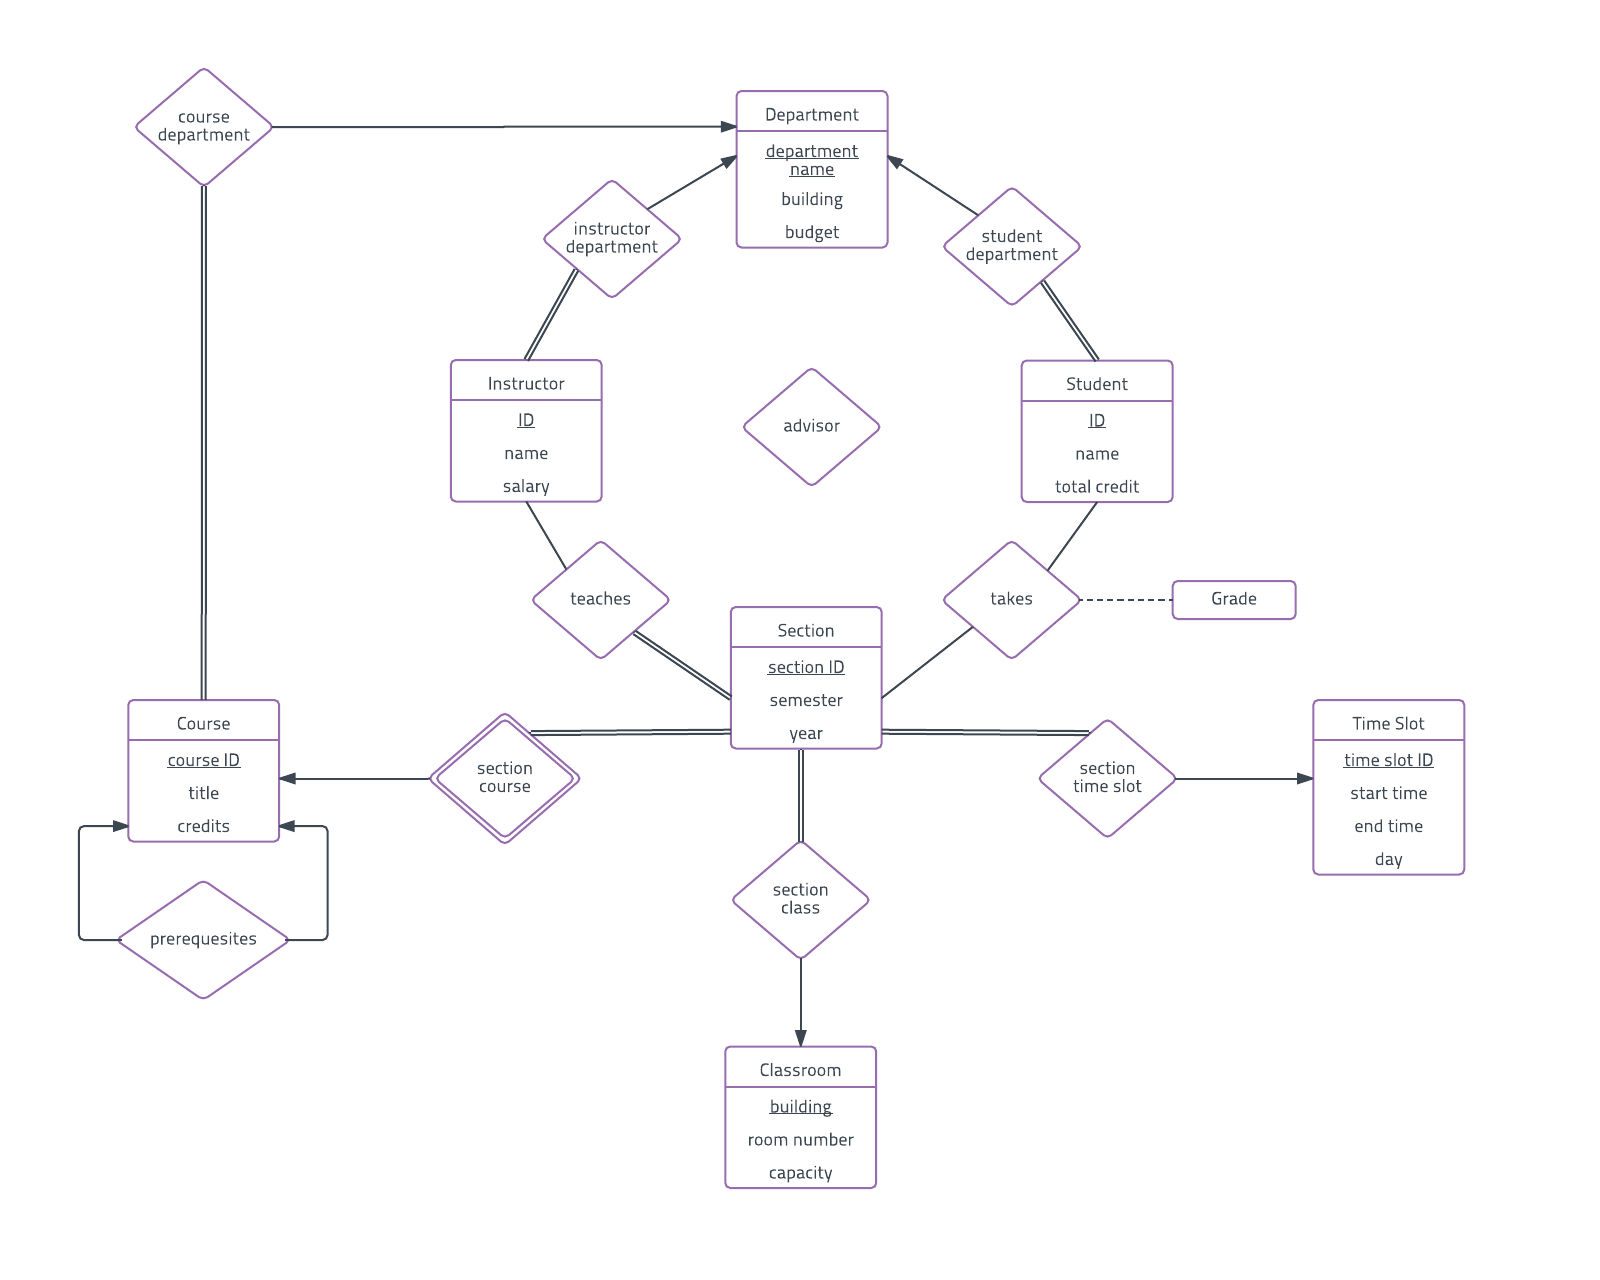 Er Diagram Examples And Templates | Lucidchart within Complex Er Diagram Examples